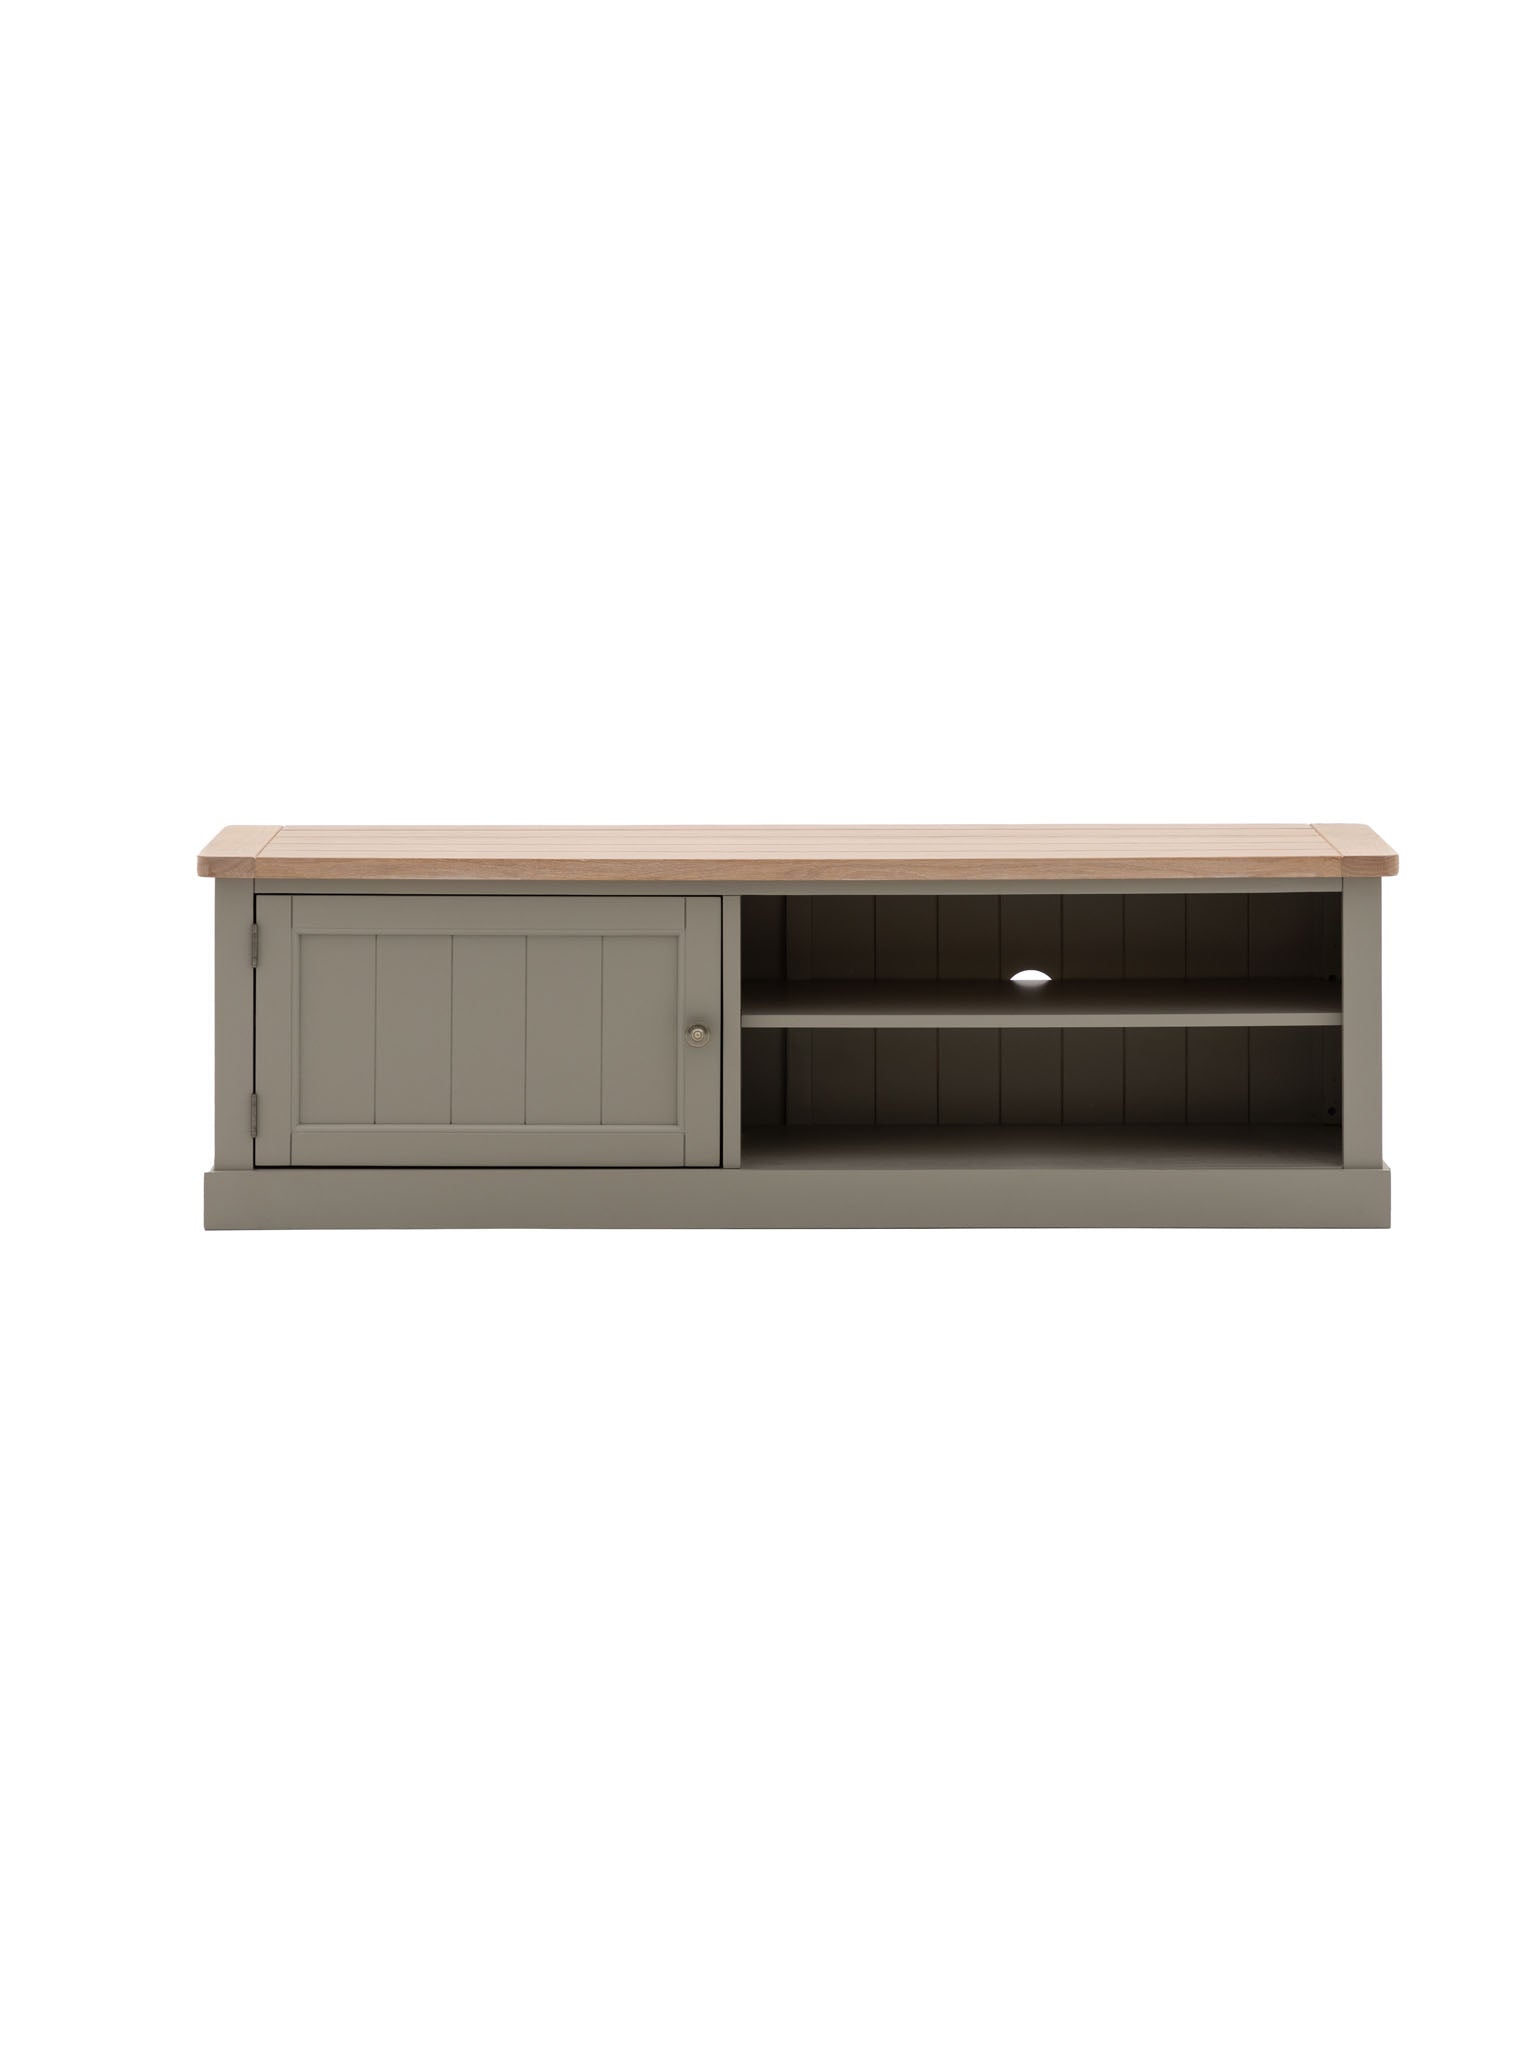 farmhouse style oak top media unit painted in olive green